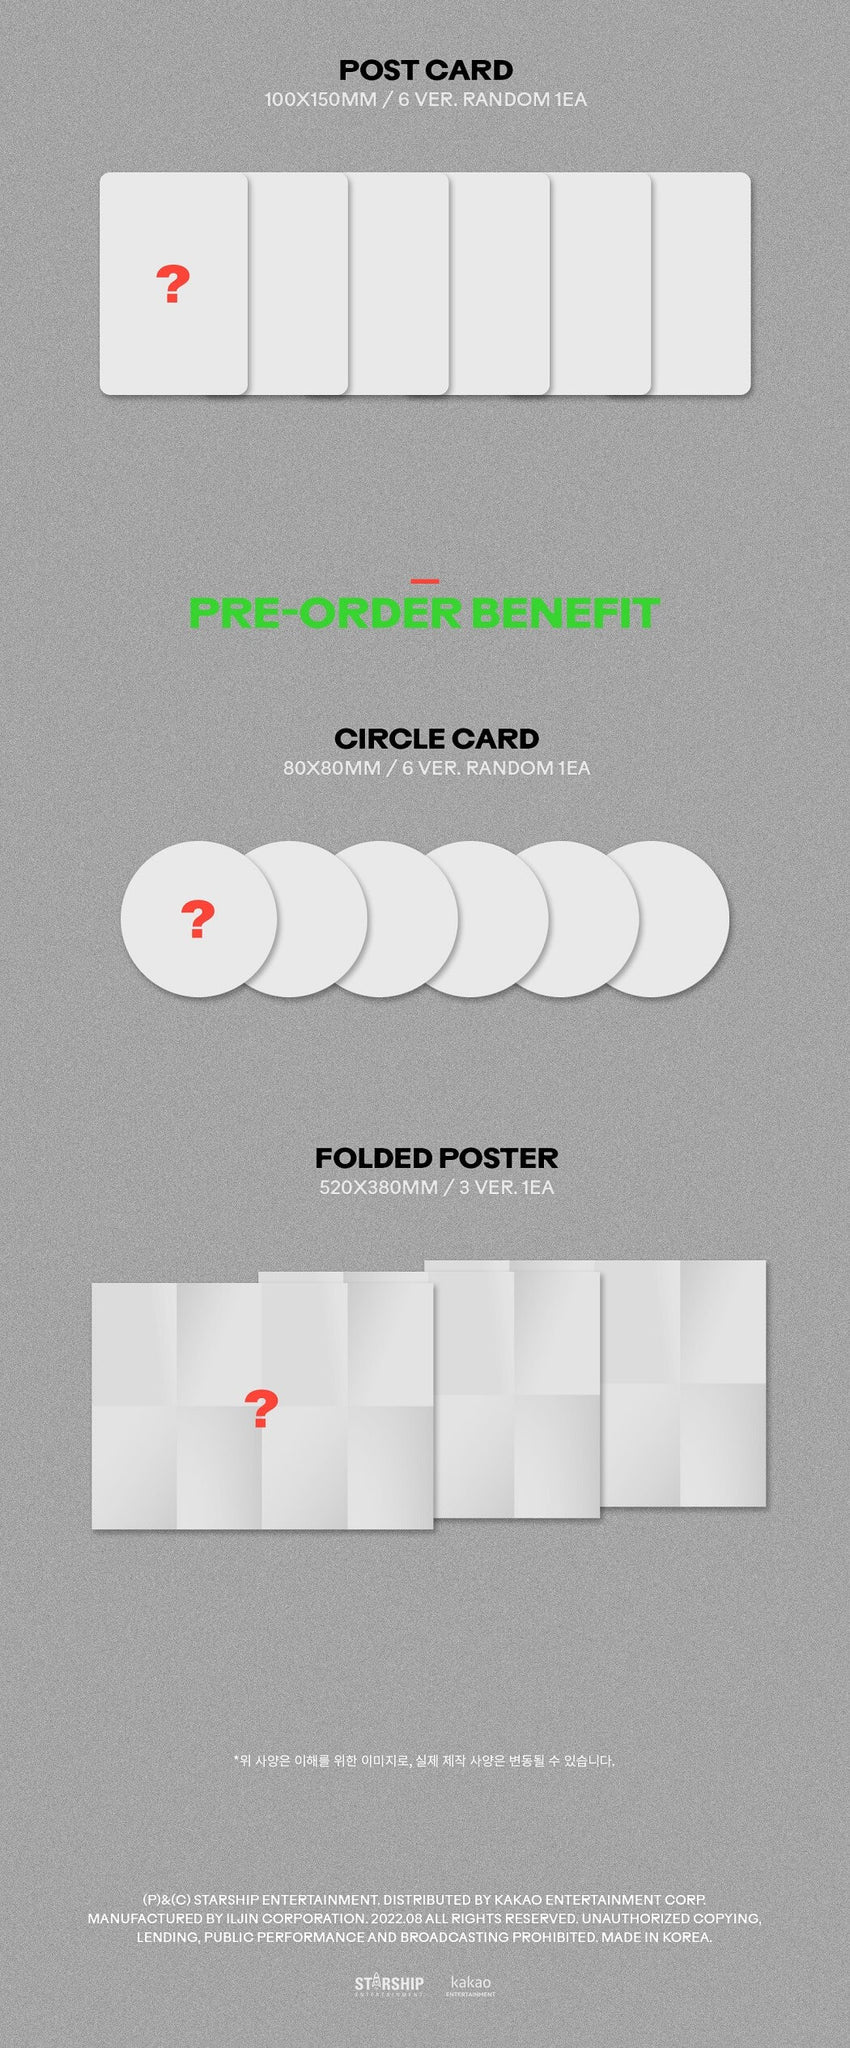 IVE After Like Inclusions Postcard Pre-order Benefits Circle Card Folded Poster